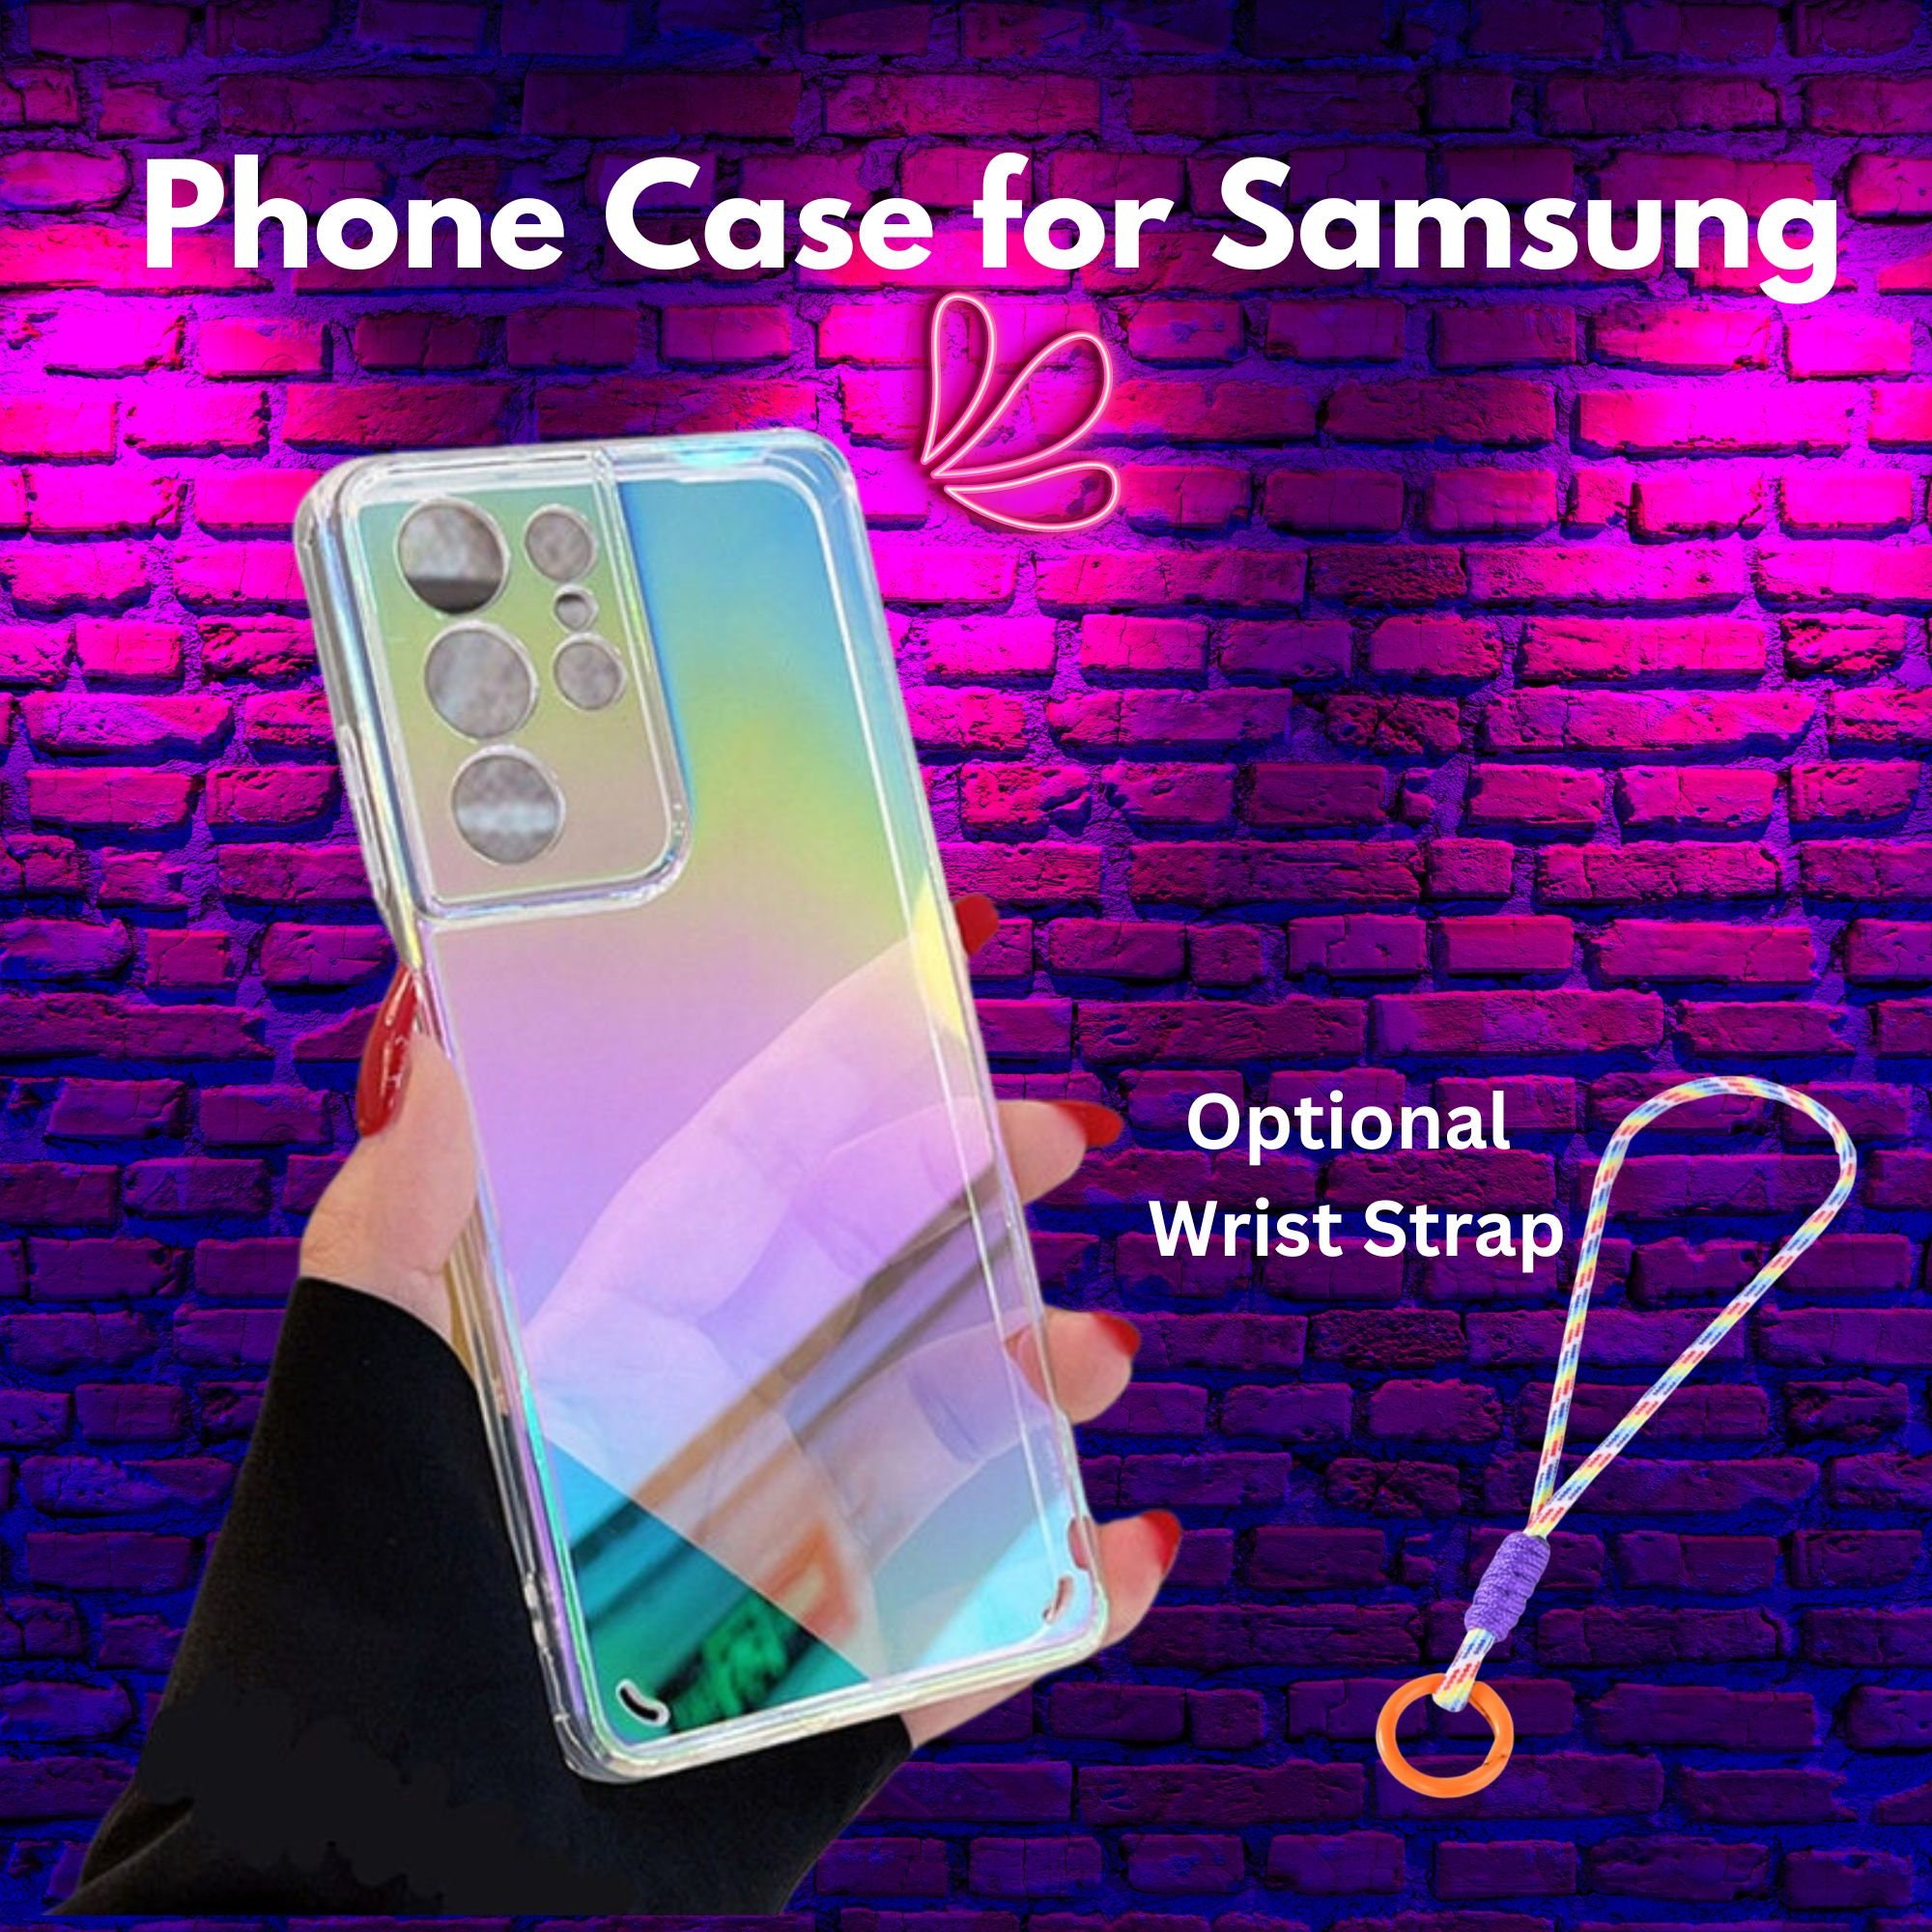 Link-5--DIY Samsung Case Material Set（no glitter inside, order another –  hgcaseparty